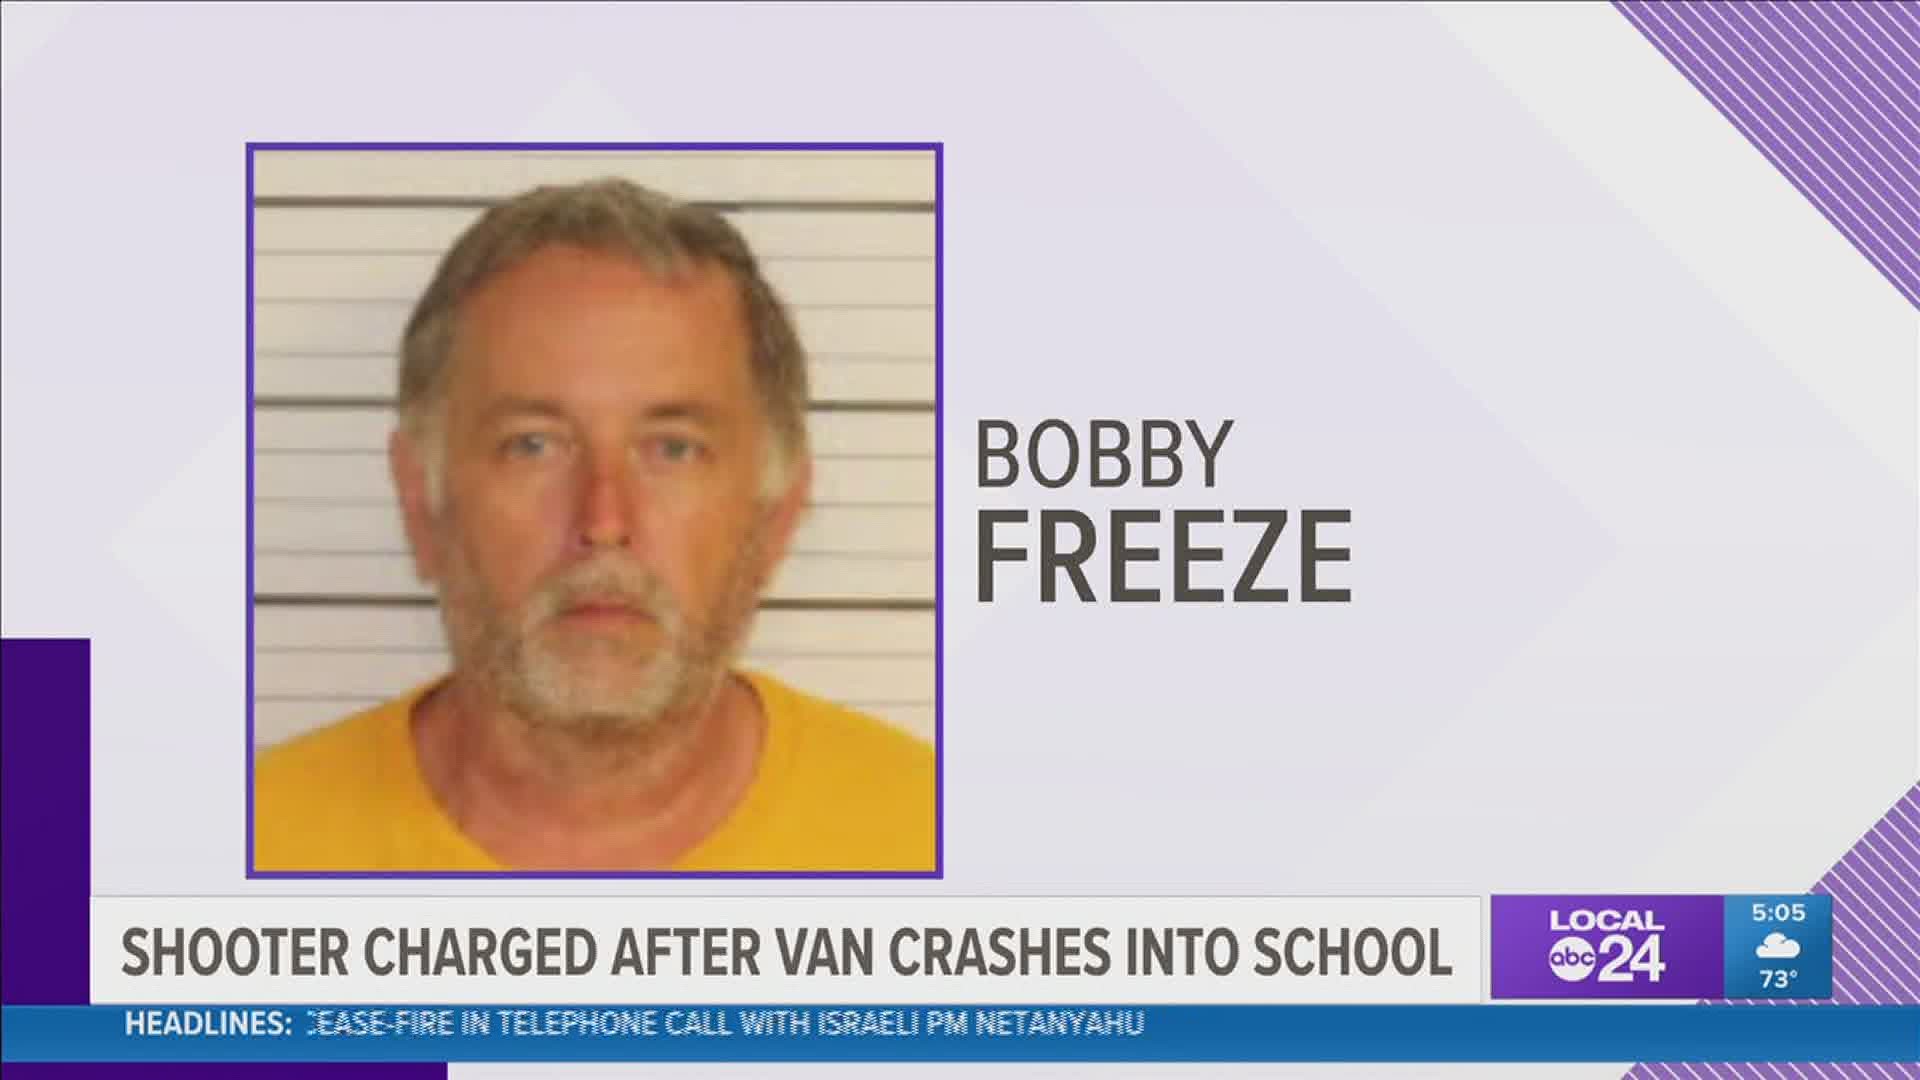 51-year-old Bobby Freeze has been charged in the shooting.